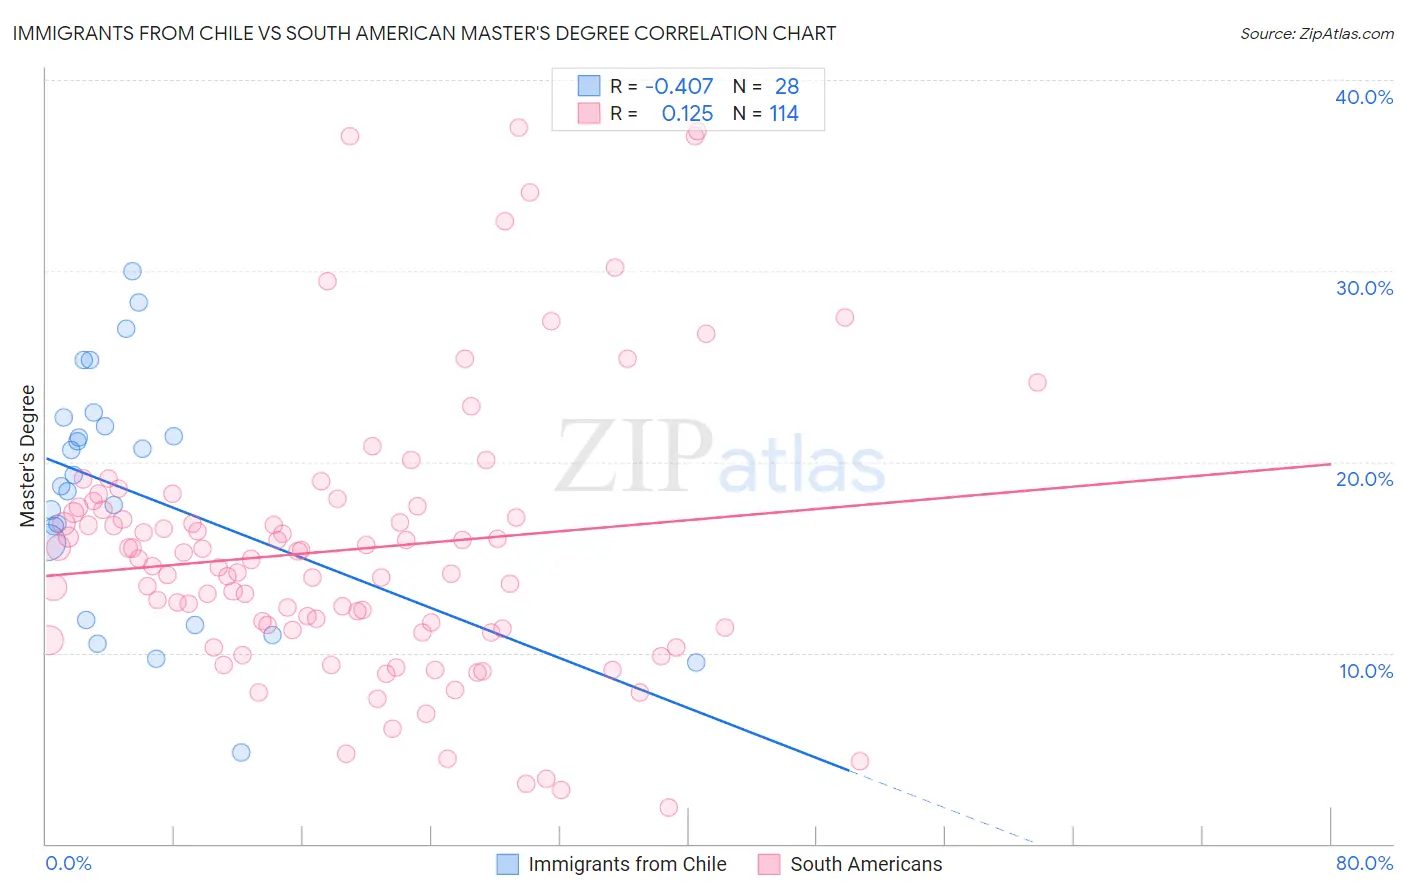 Immigrants from Chile vs South American Master's Degree